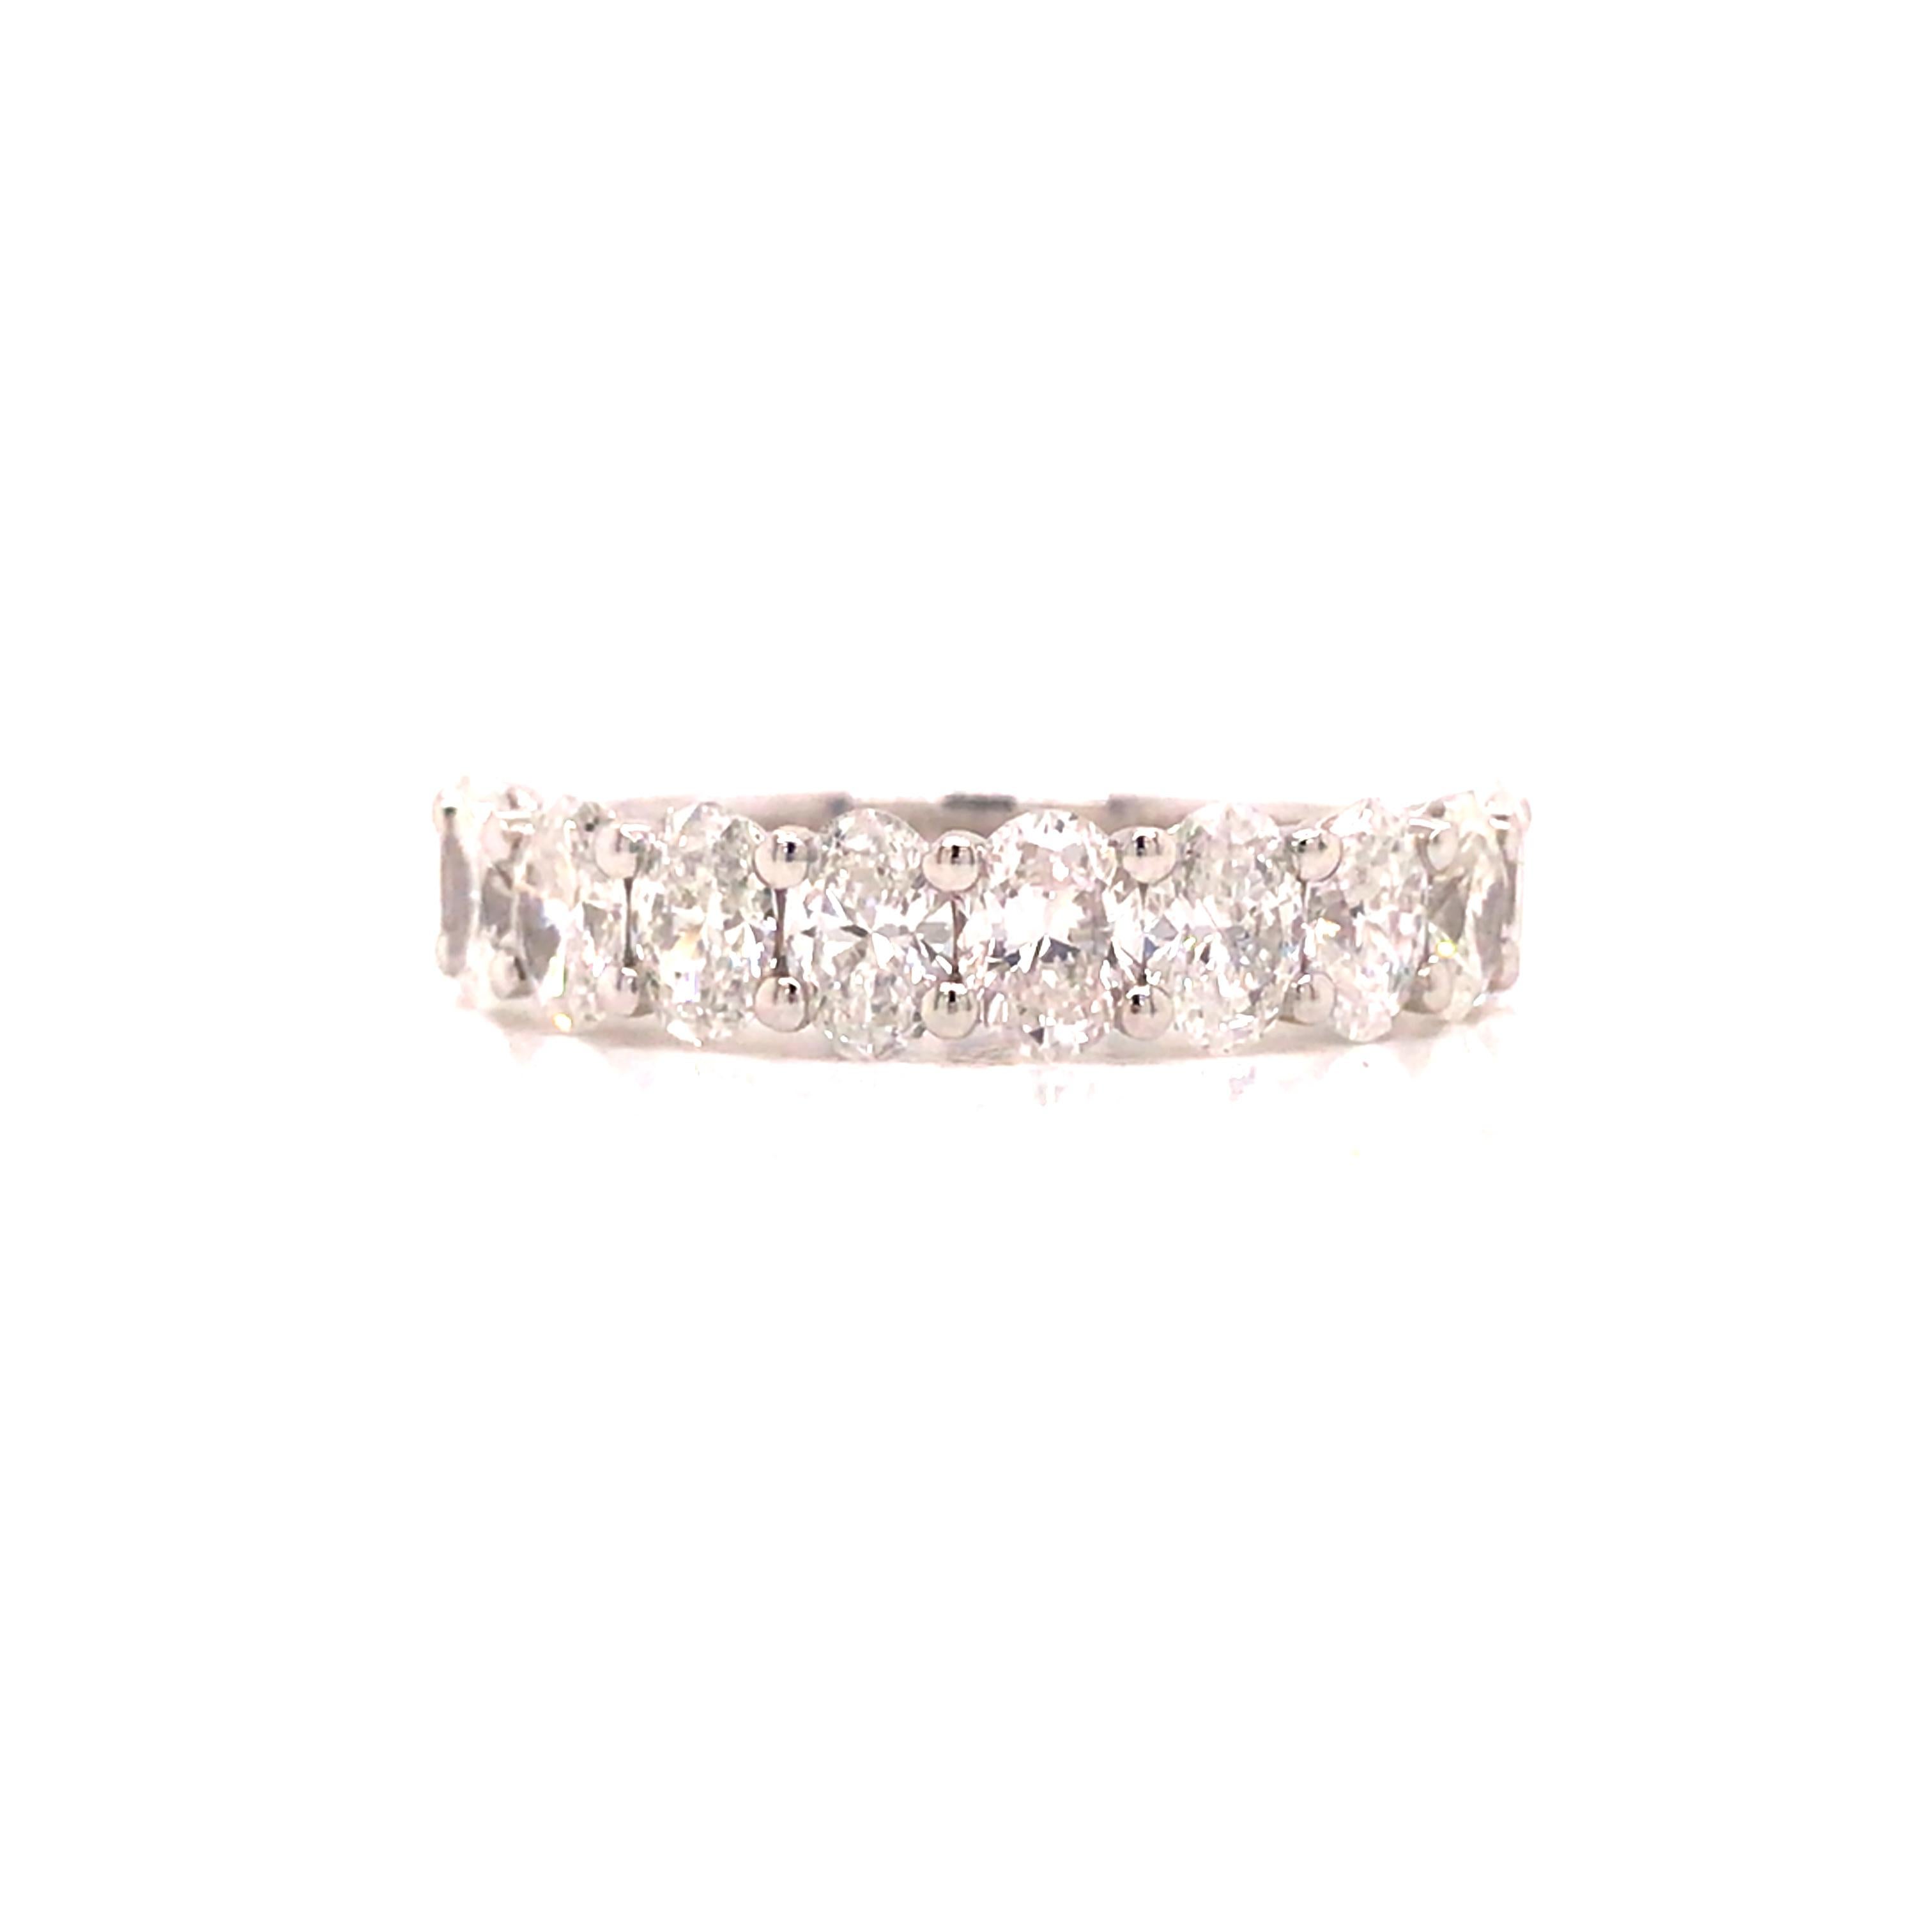 Oval Diamond Halfway Eternity Band in 14K White Gold.  (10) Oval Diamonds weighing 2.0 carat total weight, G-H in color and VS-SI in clarity are expertly set.  The Band measures 3/16 inch in width.  Ring size 6 1/2. 2.7 grams.